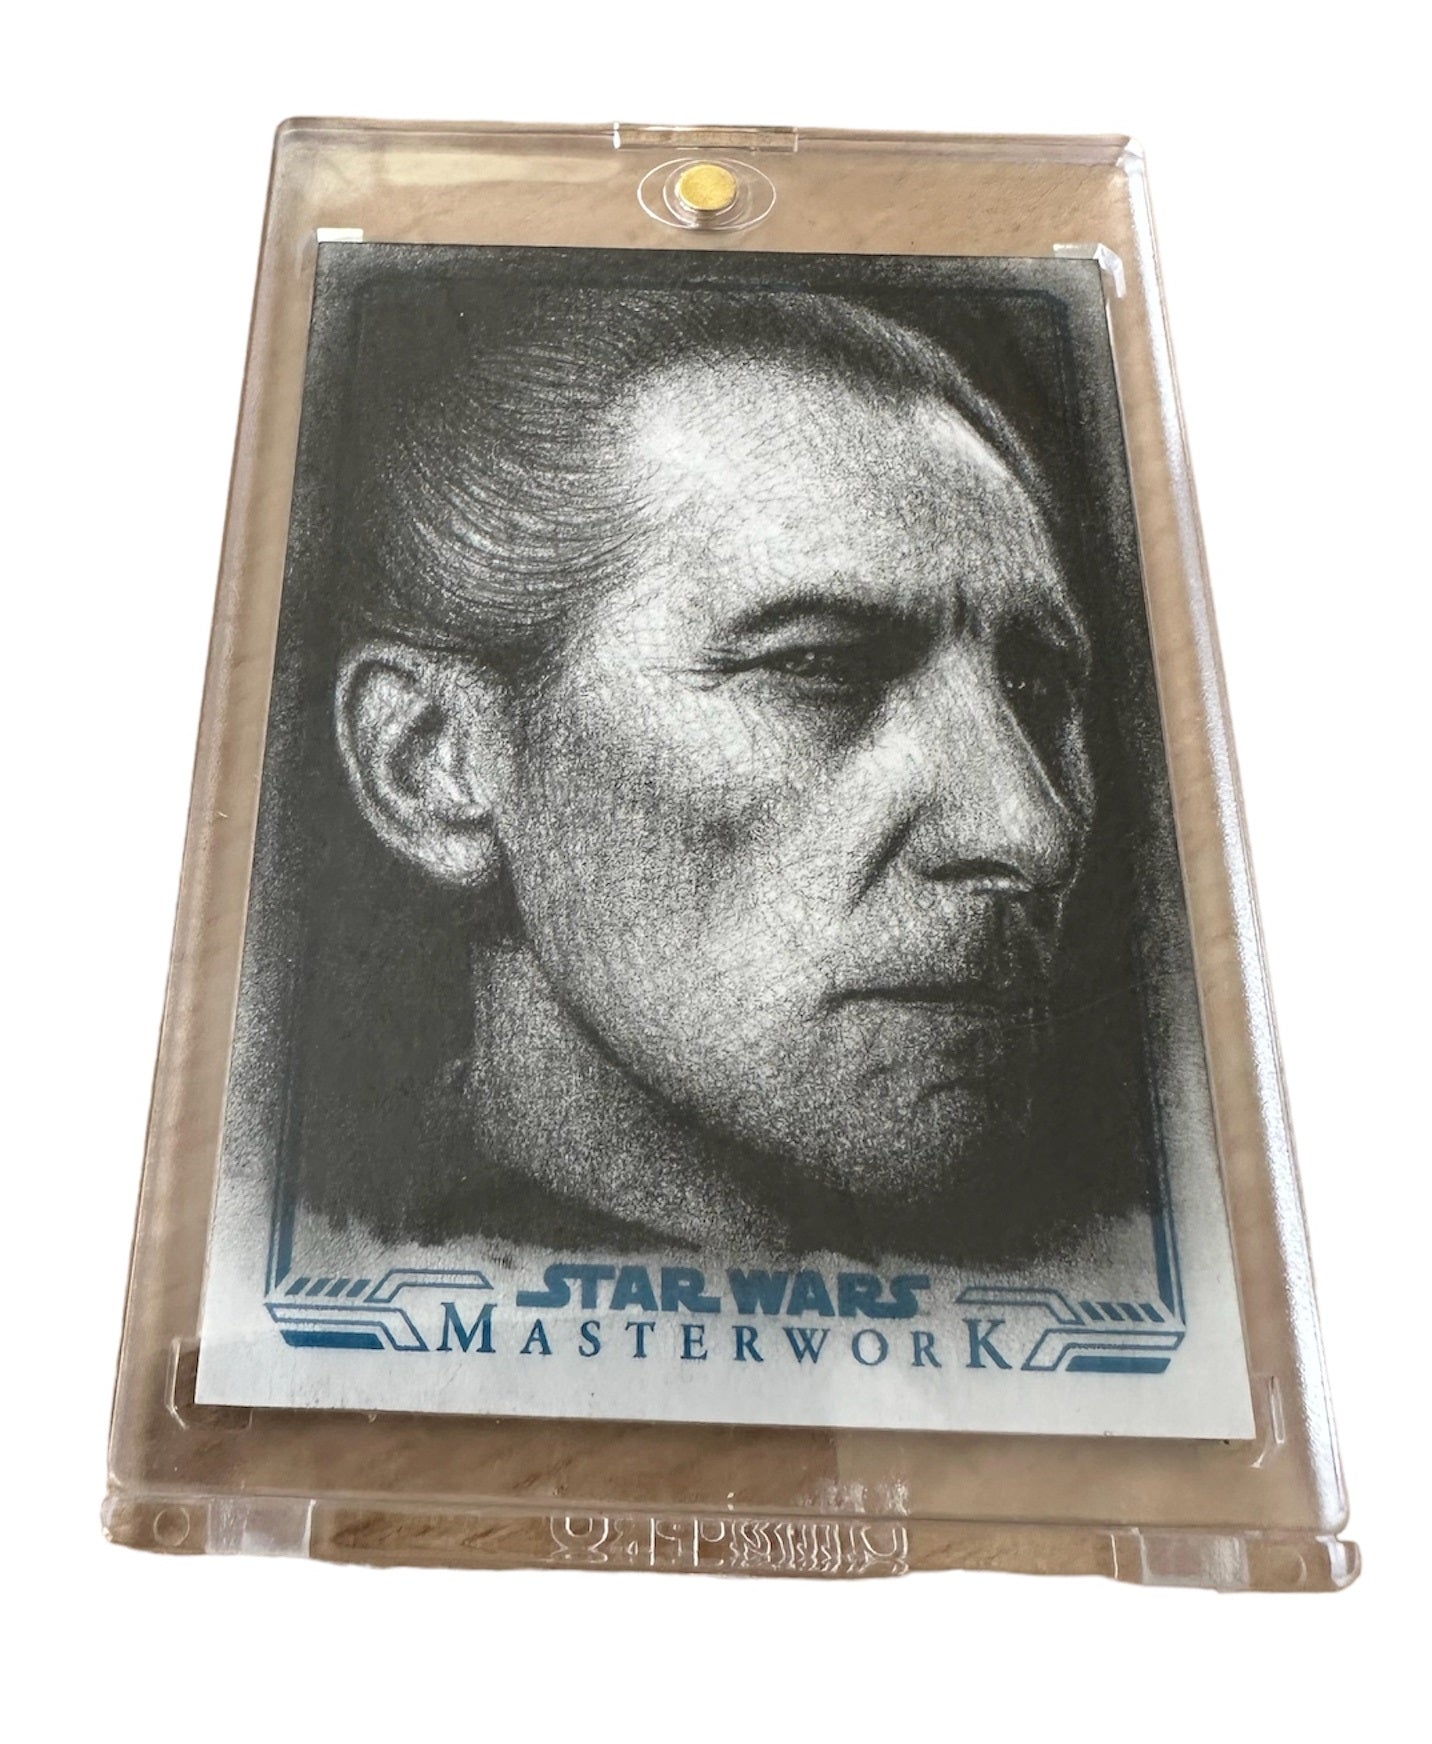 Vintage Topps 2019 Star Wars Masterworks Ultra Ultra Rare Gold Sketch Card - Grand Moff Tarkin AKA Peter Cushion - Autographed By Artist Andrew Fry - In Ultra Pro Case - Former Shop Stock